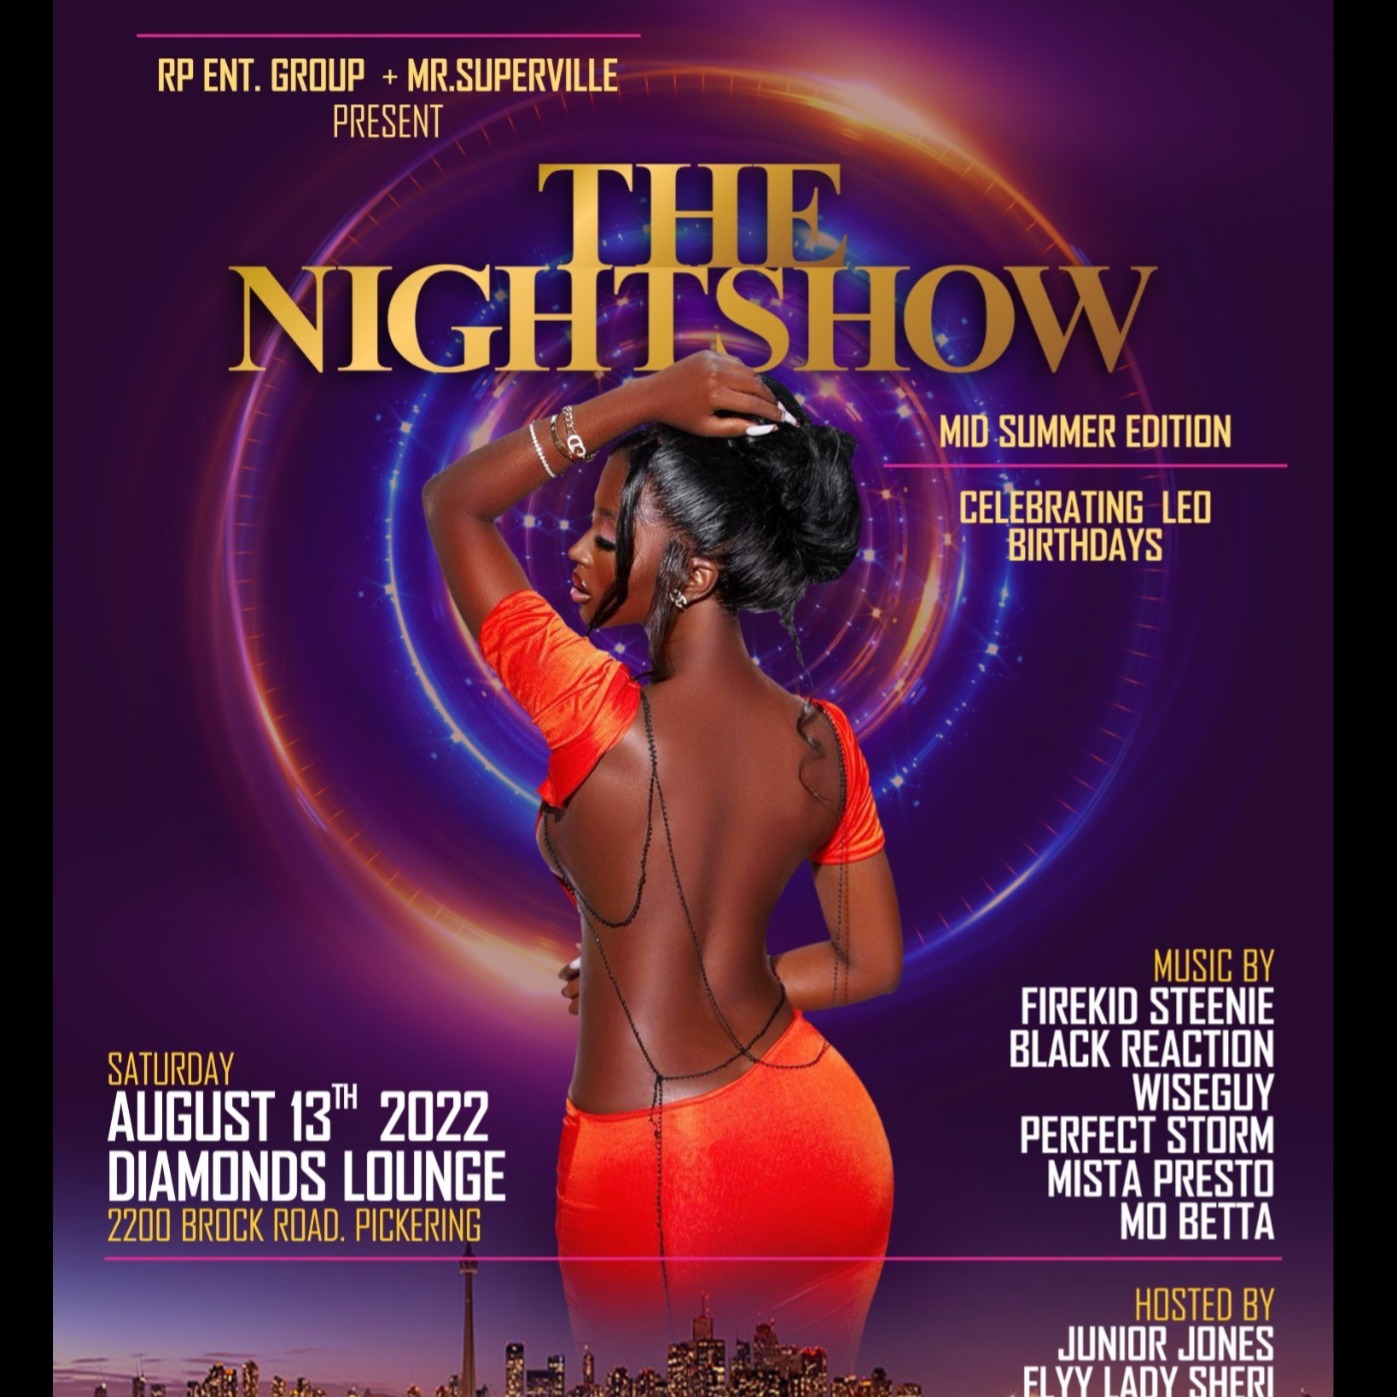 The Night show mid Summer